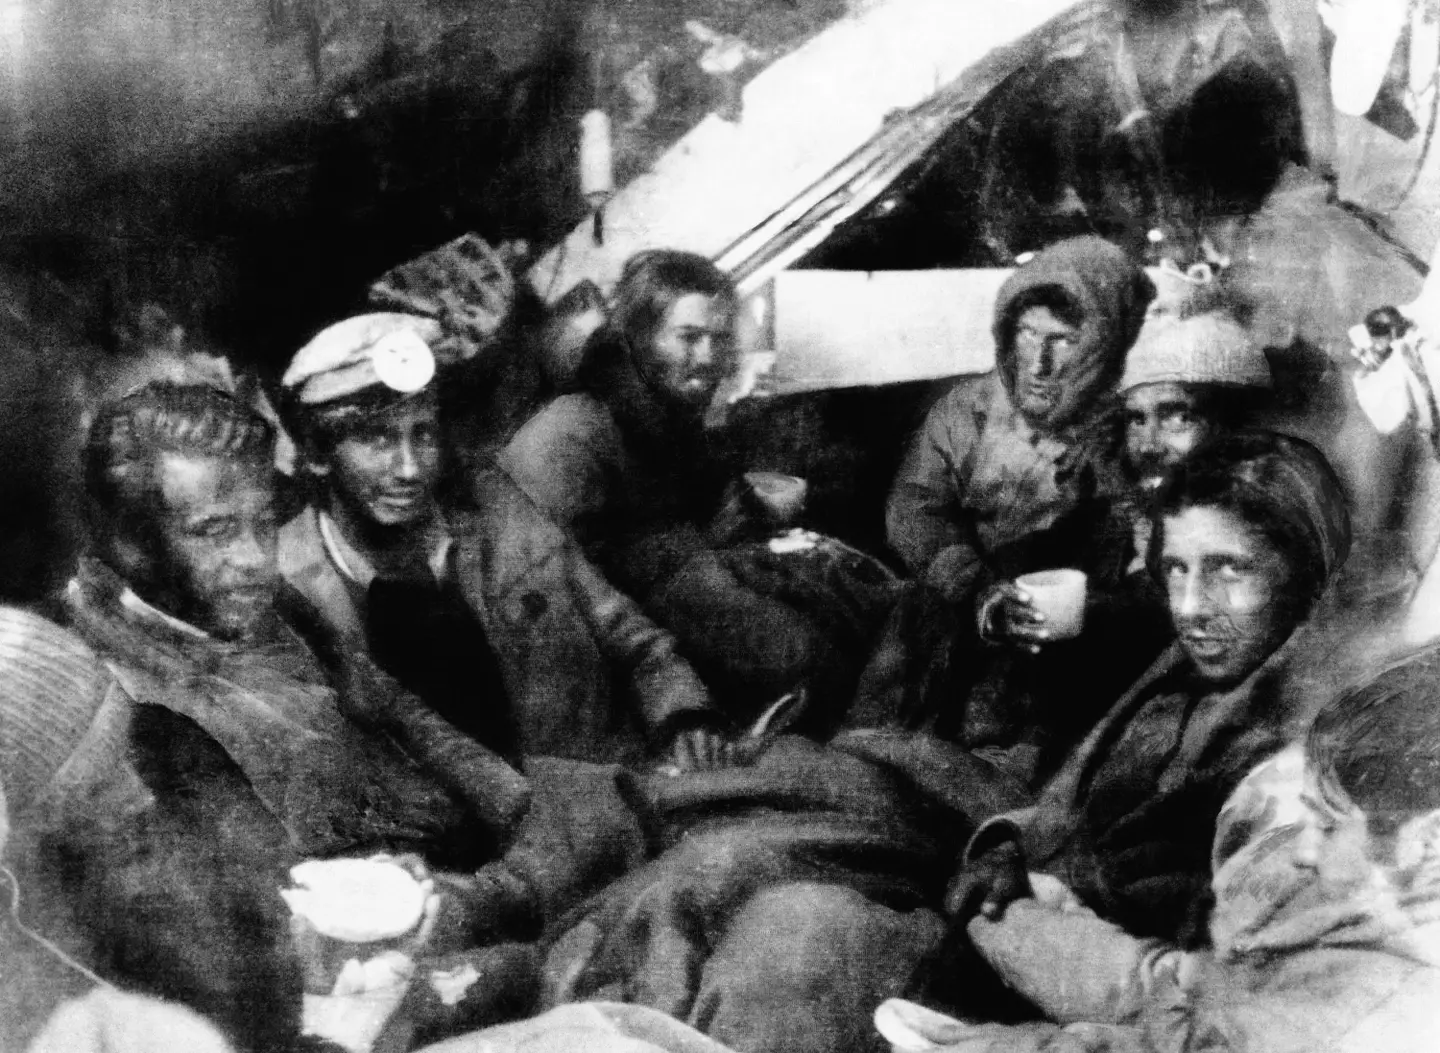 Survivors of the plane crash shortly after being rescued.